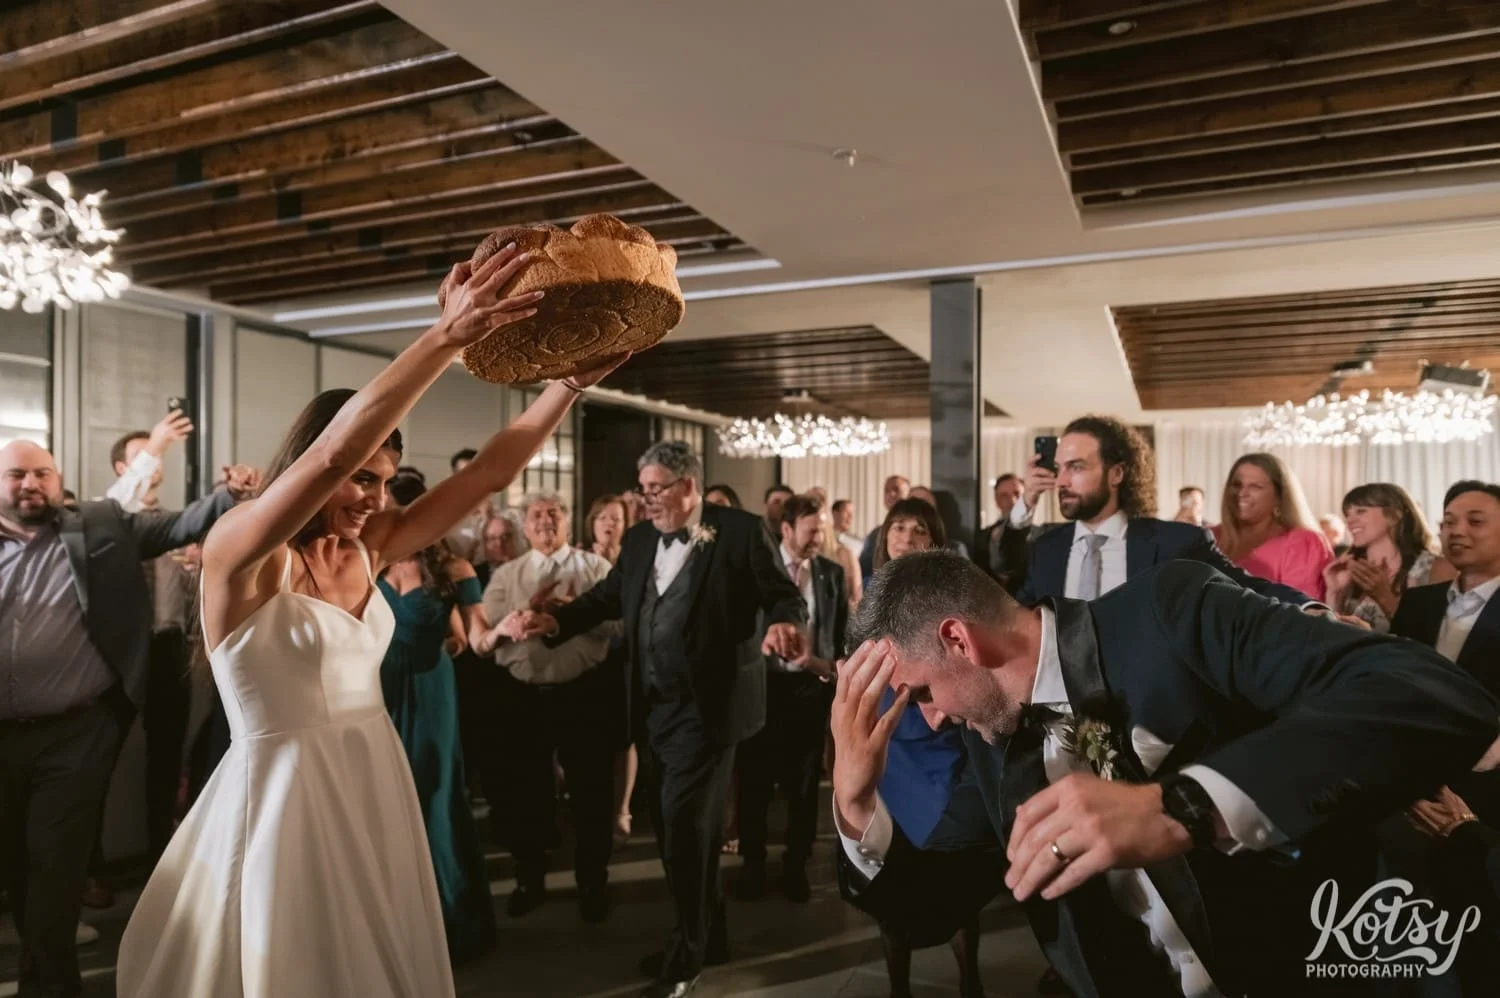 A groom bows at his bride who holds up a large loaf of bread during their Village Loft wedding reception in Toronto, Canada